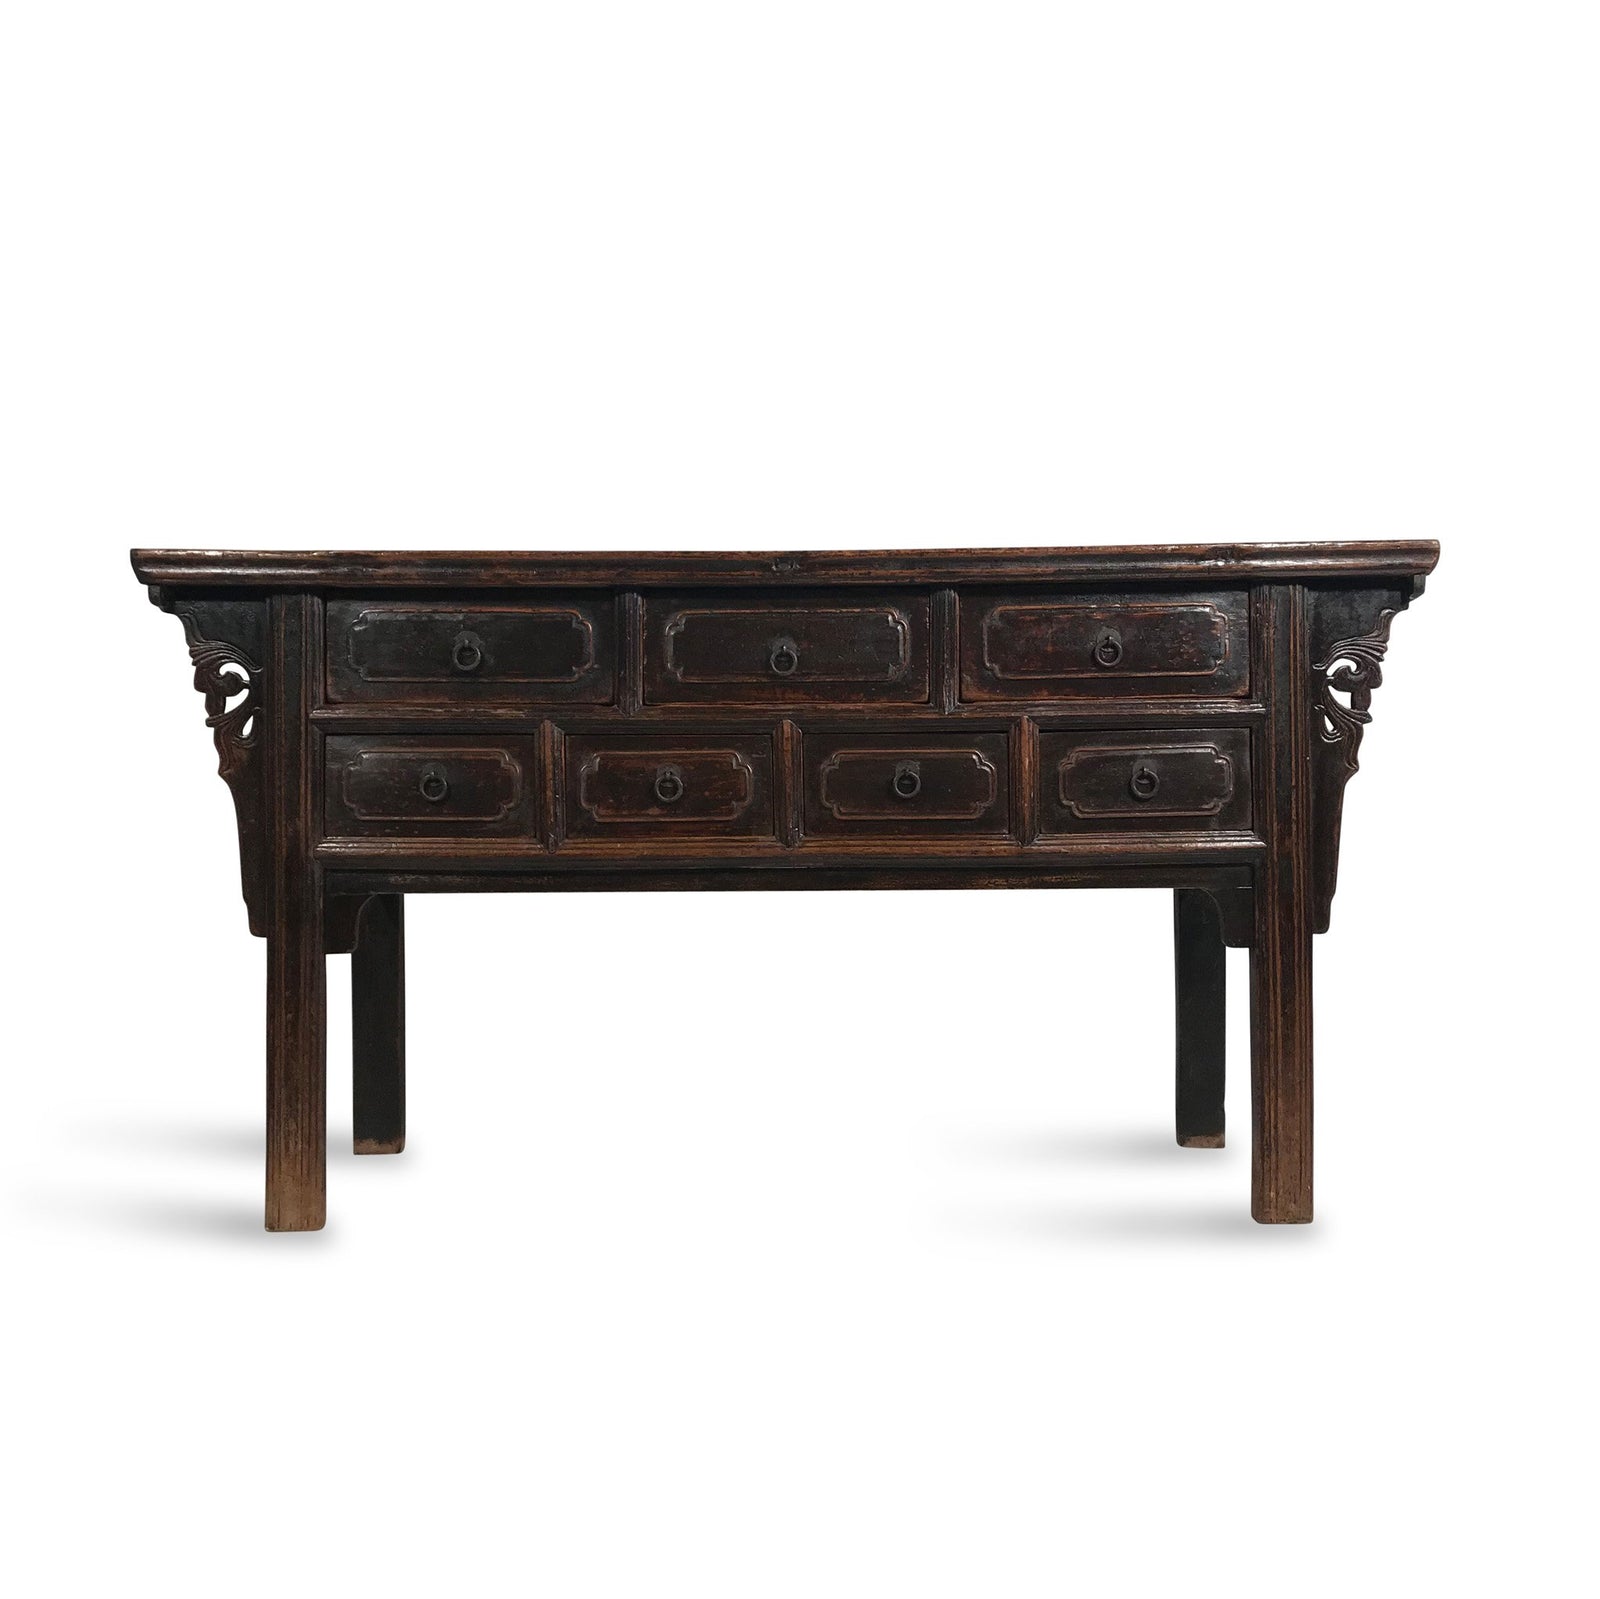 Console Table With 7 Drawers - Elm Wood - Ca 19thC - 162 x 50 x 85 (wxdxh cms) - C1245